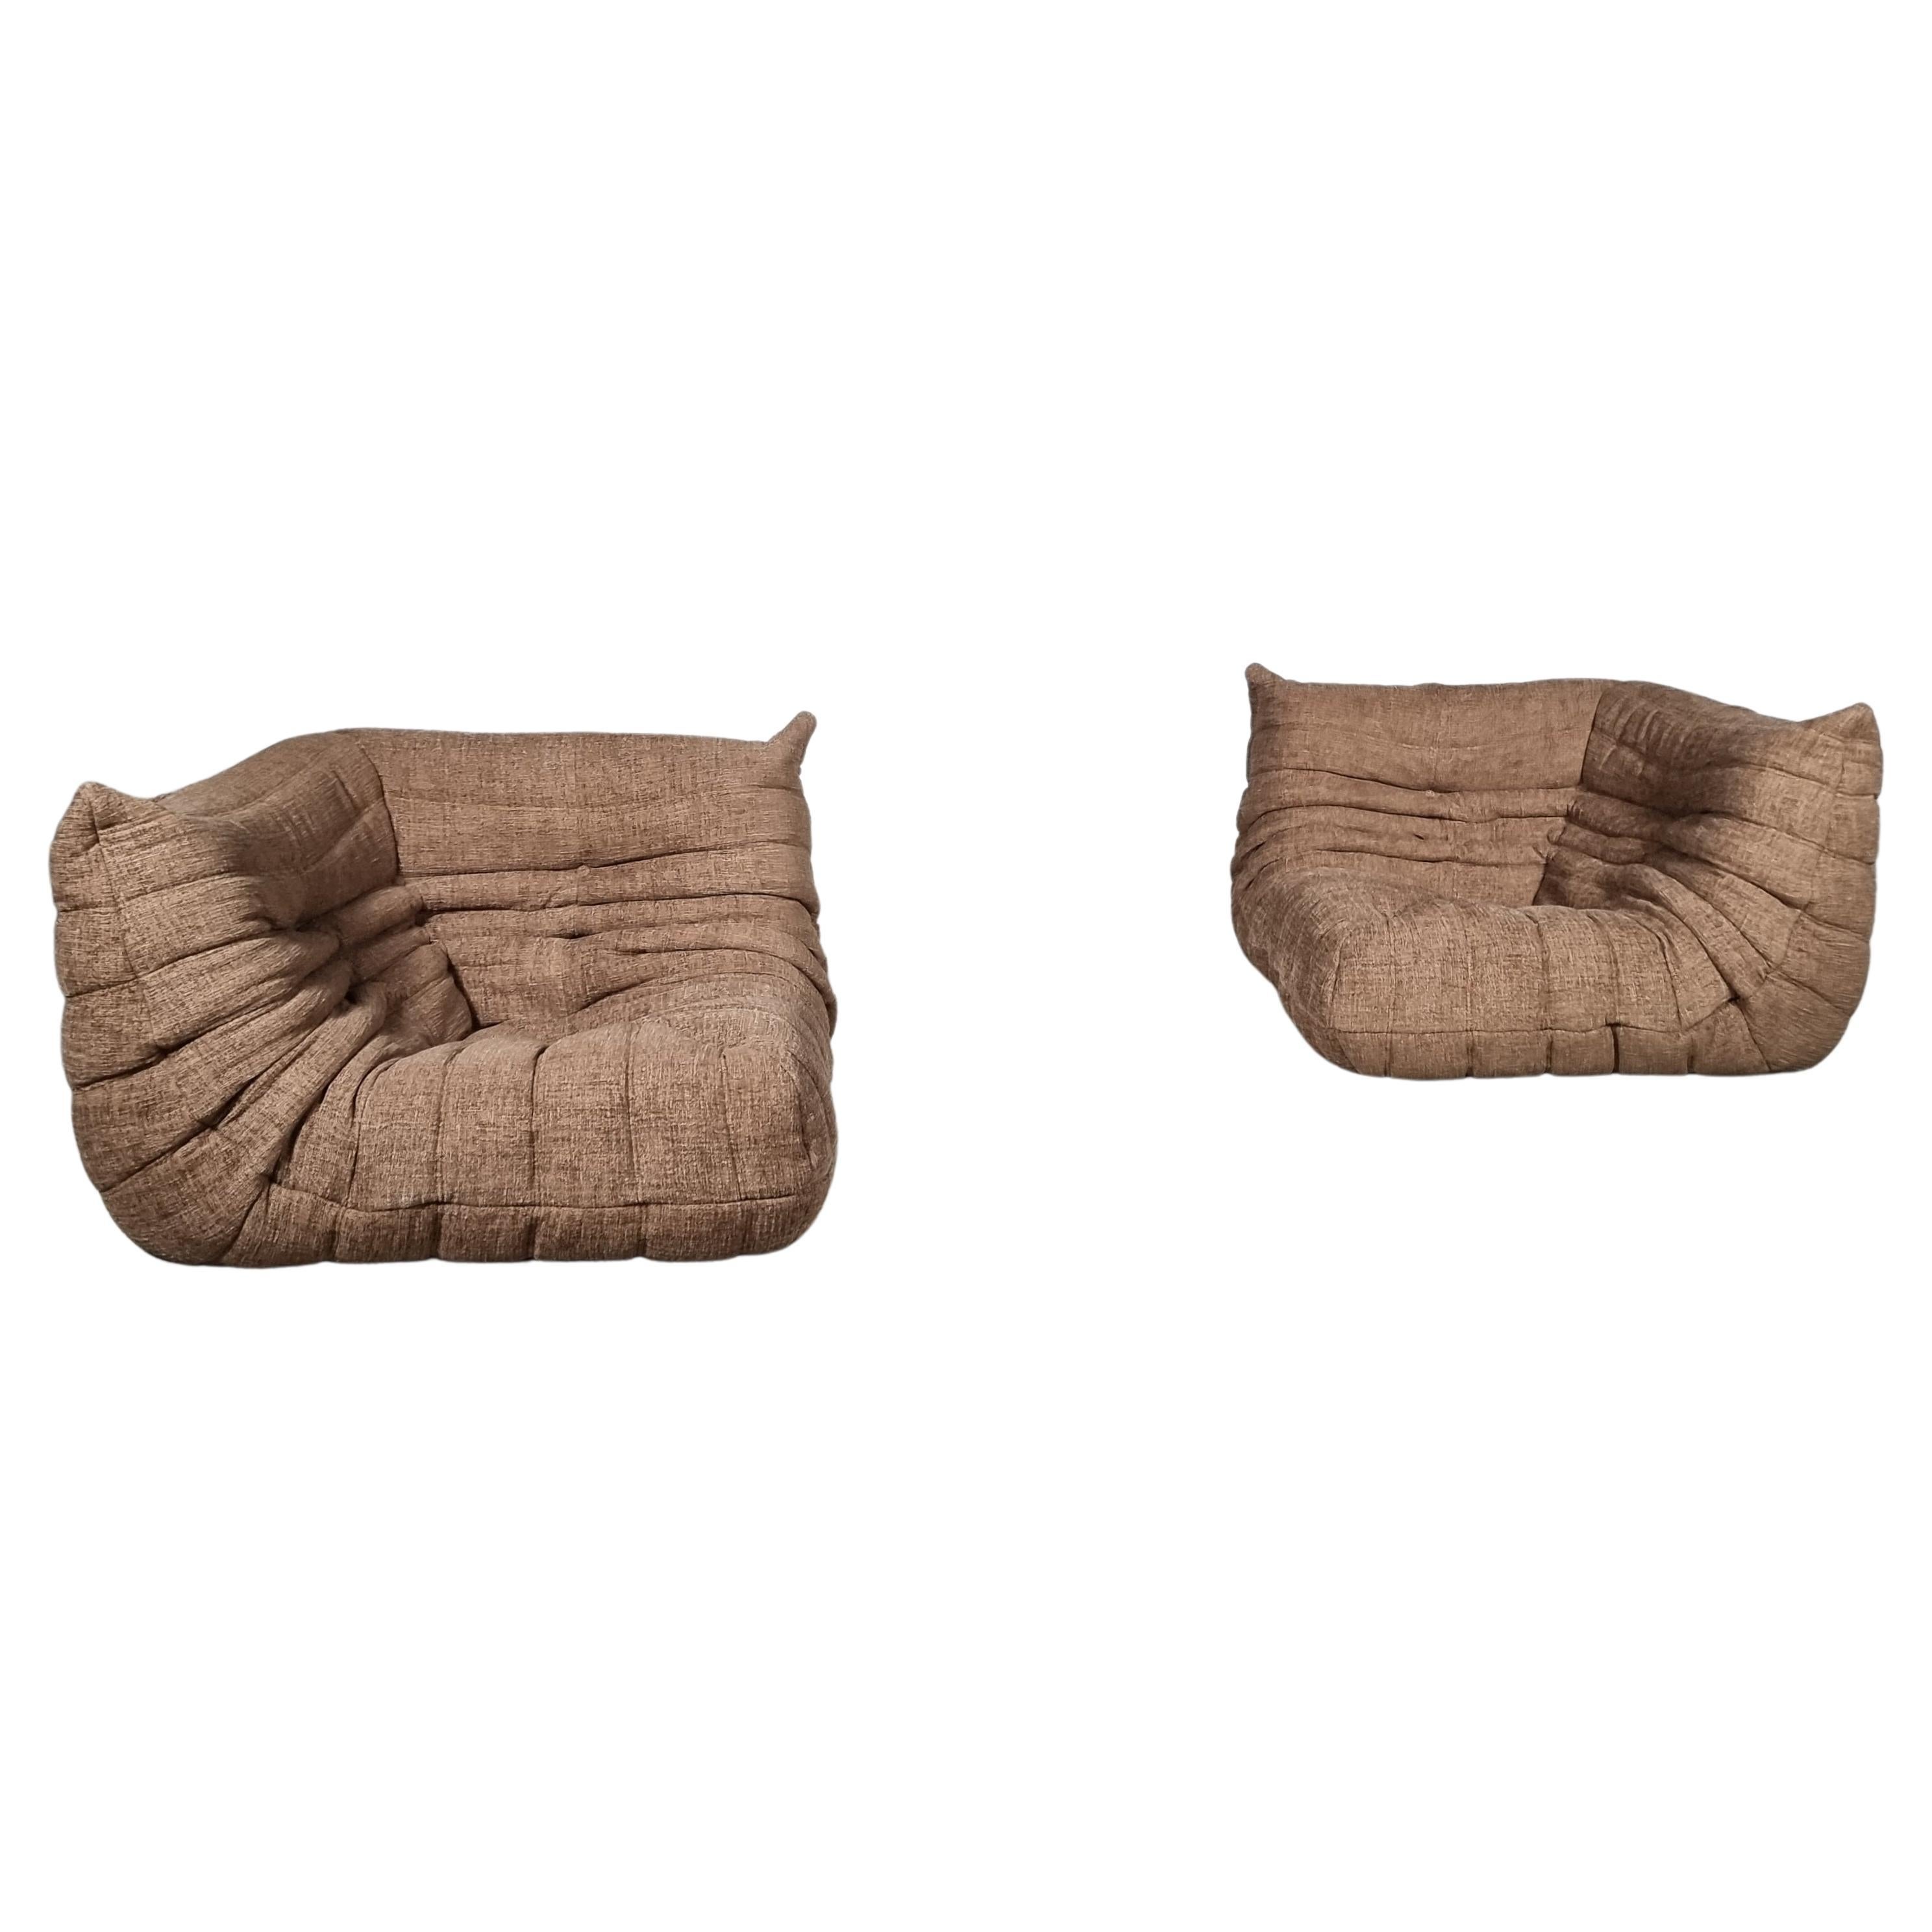 Togo Lounge Chairs by Michel Ducaroy for Ligne Roset, circa 1970s For Sale